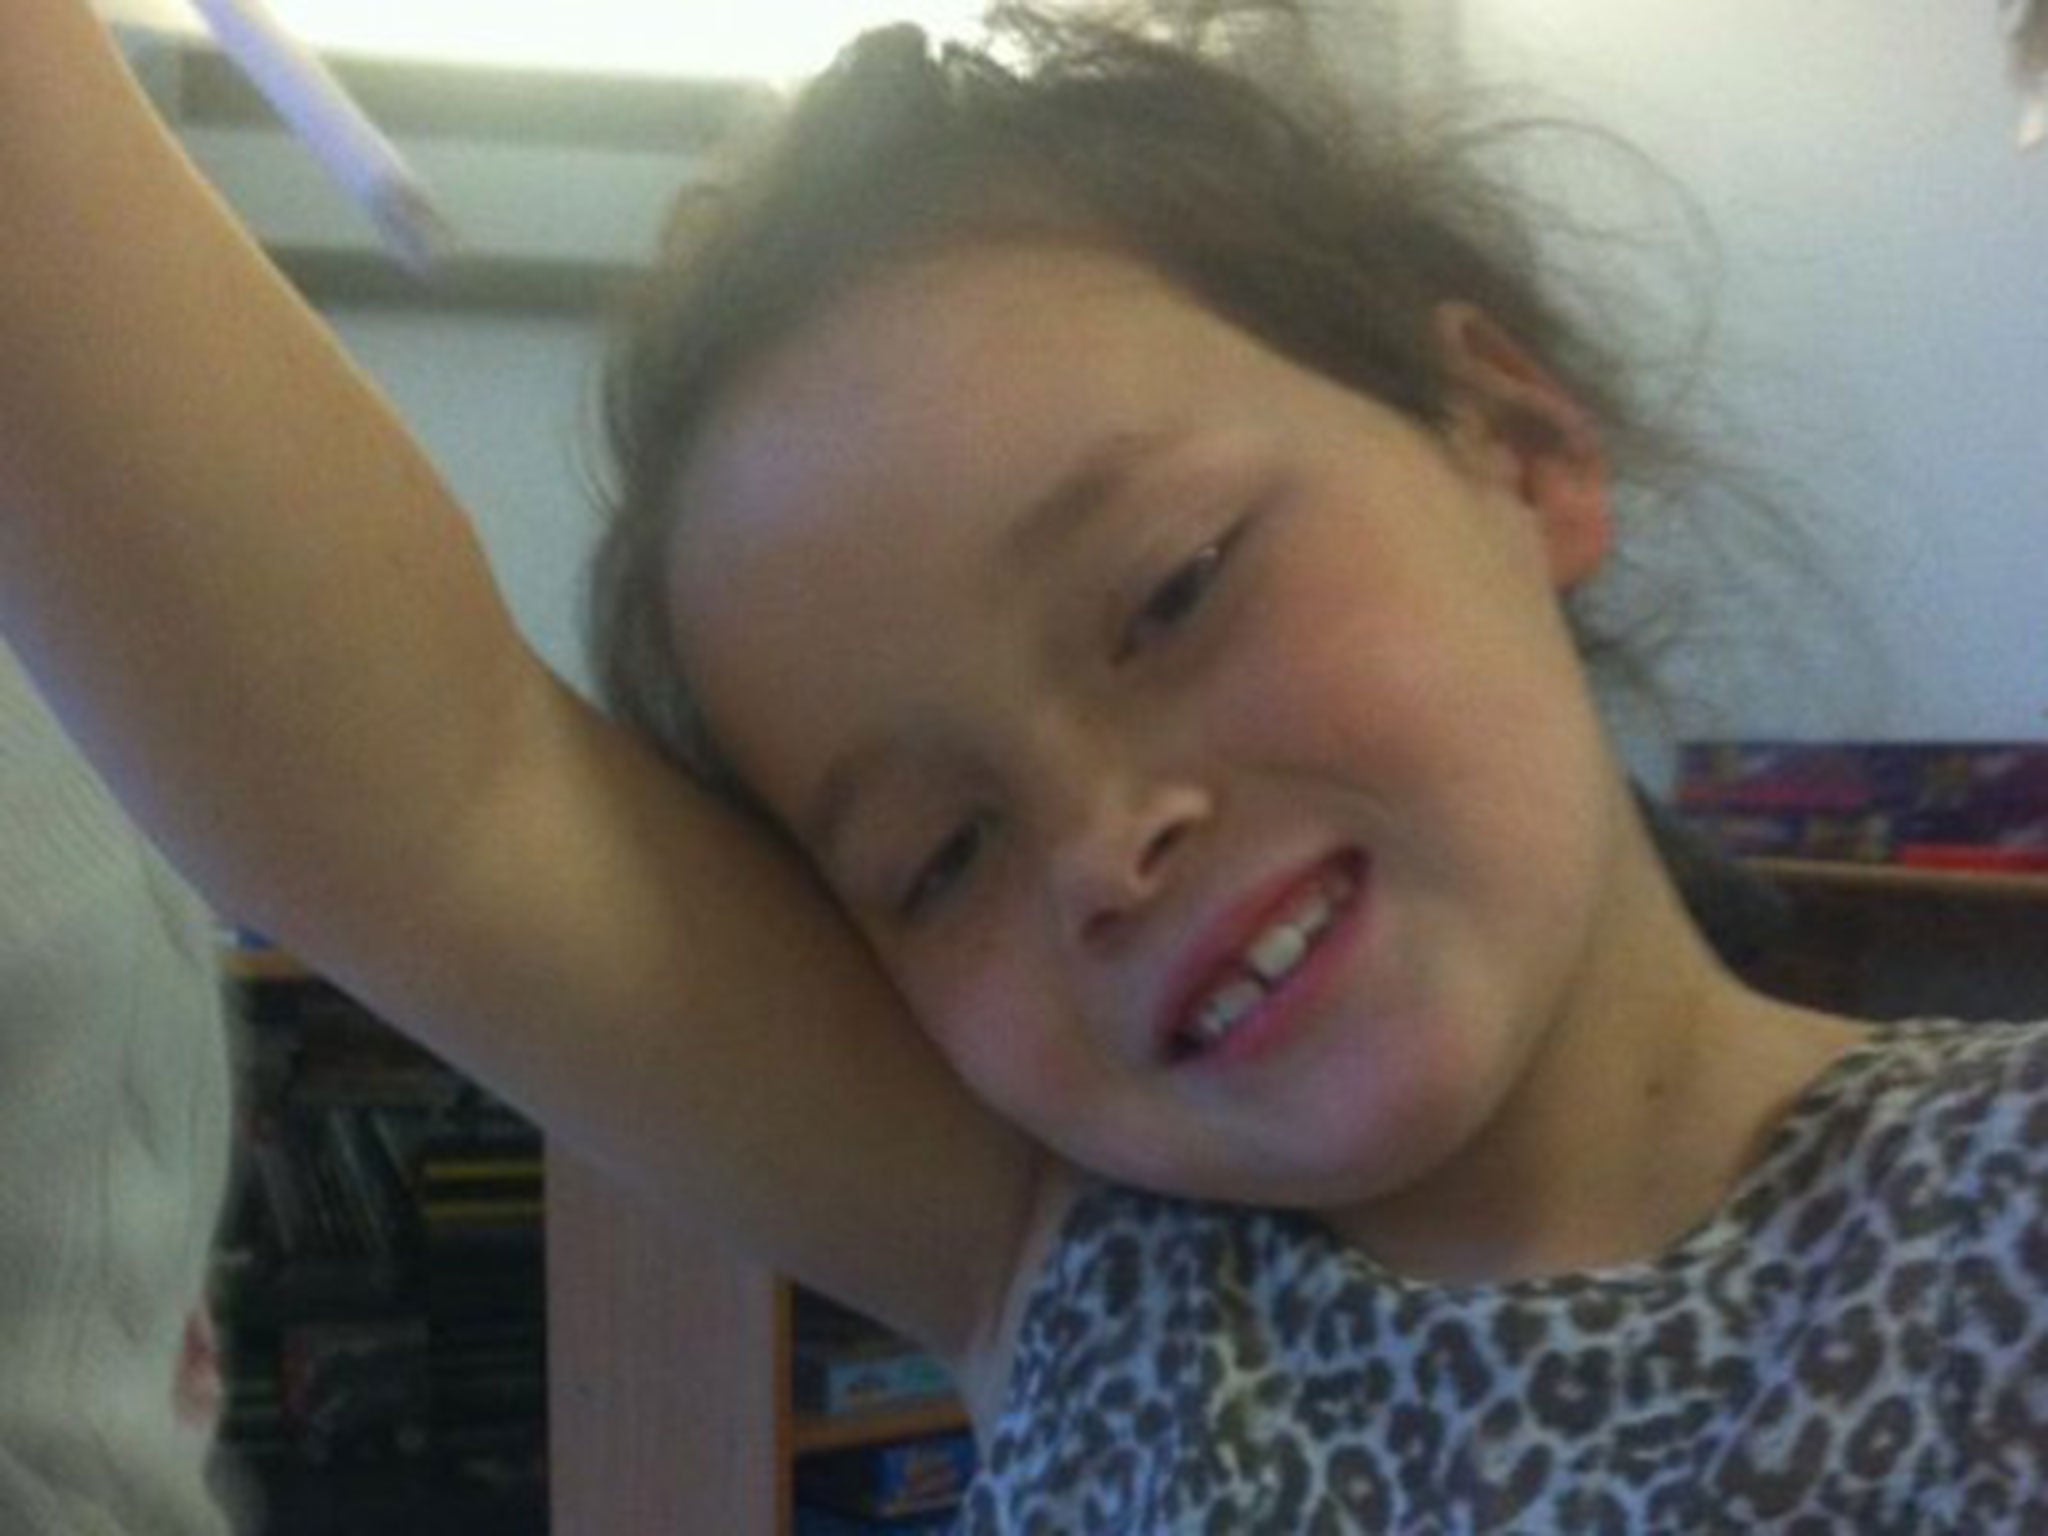 Frankie-Rose was diagnosed with brain and spinal tumours in August